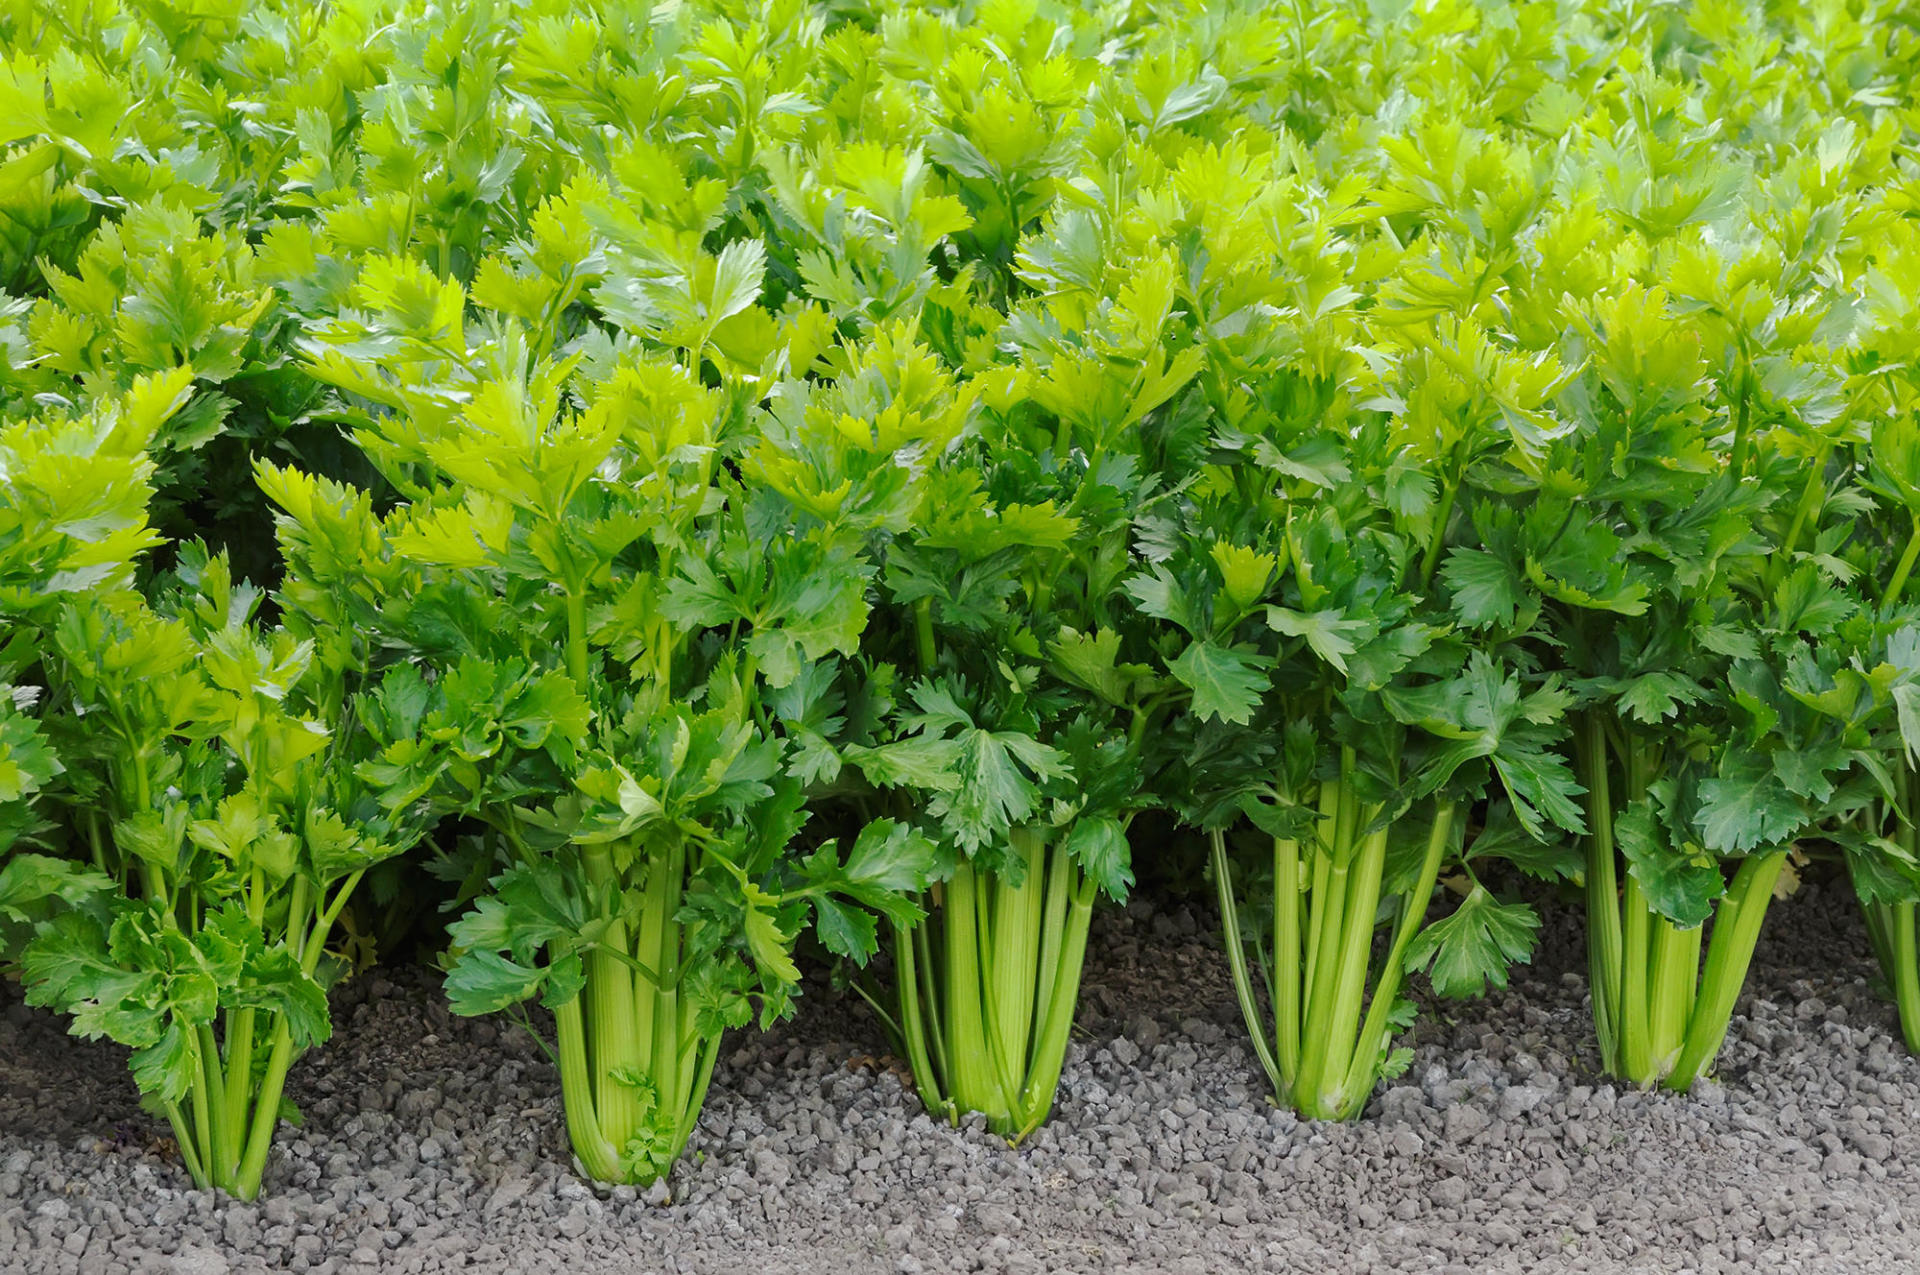 Why did humans start cultivating celery? It's low-calorie and, one might argue, low flavor. We asked some experts at the intersection of botany and anthropology to share their best guesses.